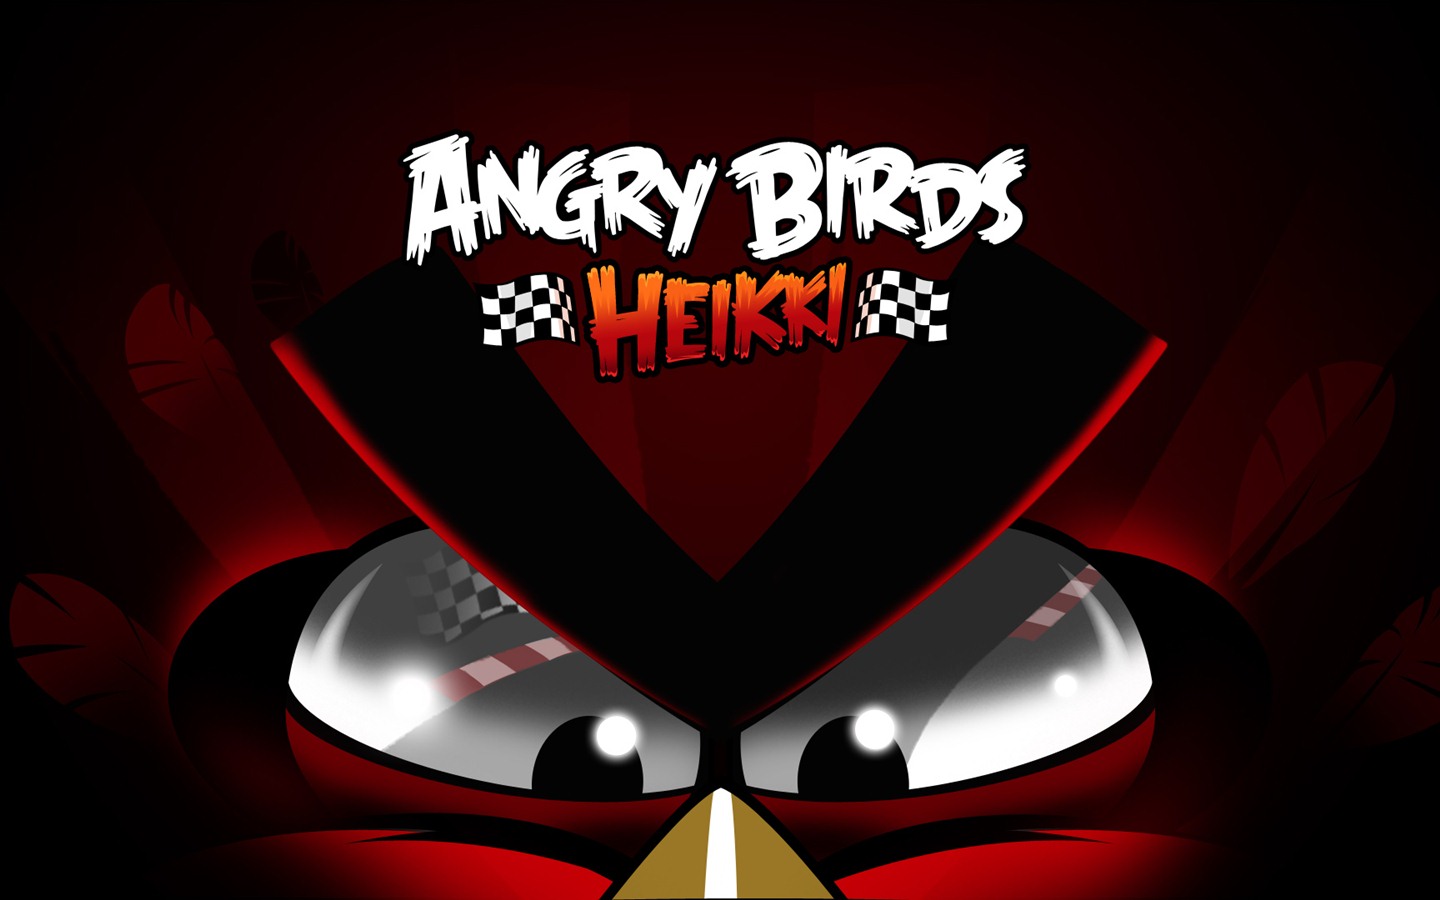 Angry Birds Game Wallpapers #18 - 1440x900